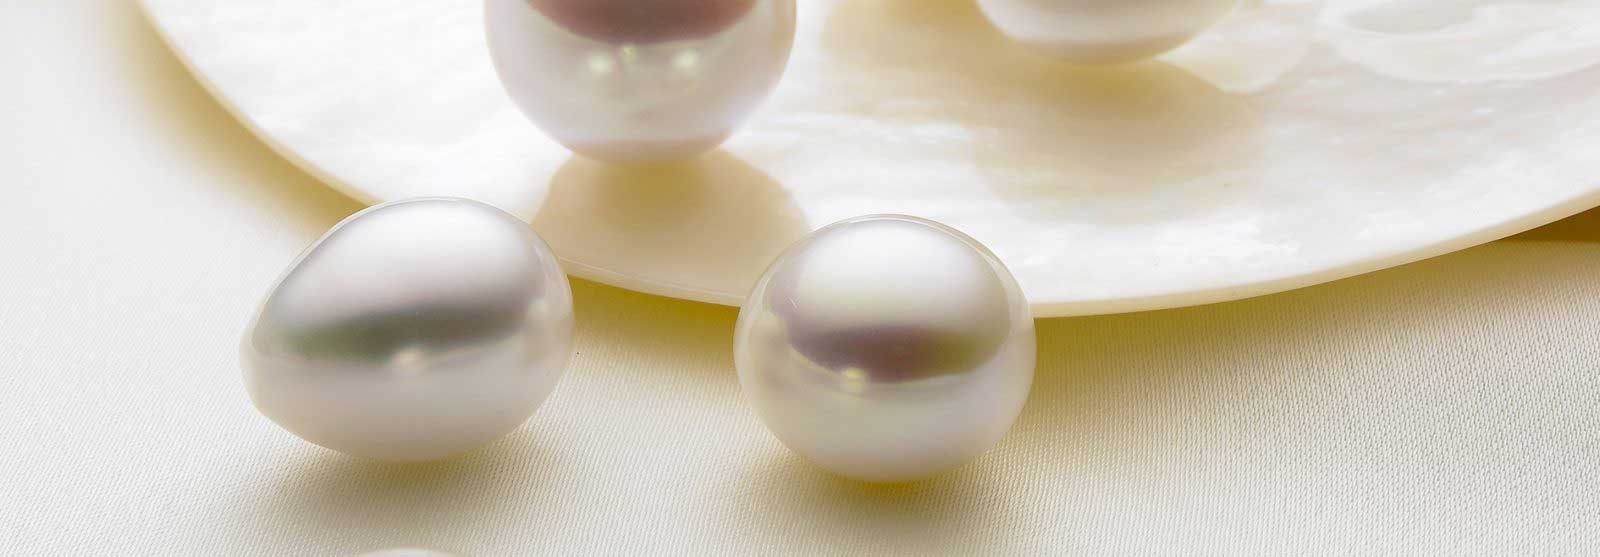 Gem Quality Pearls Paspalley Seamlessly